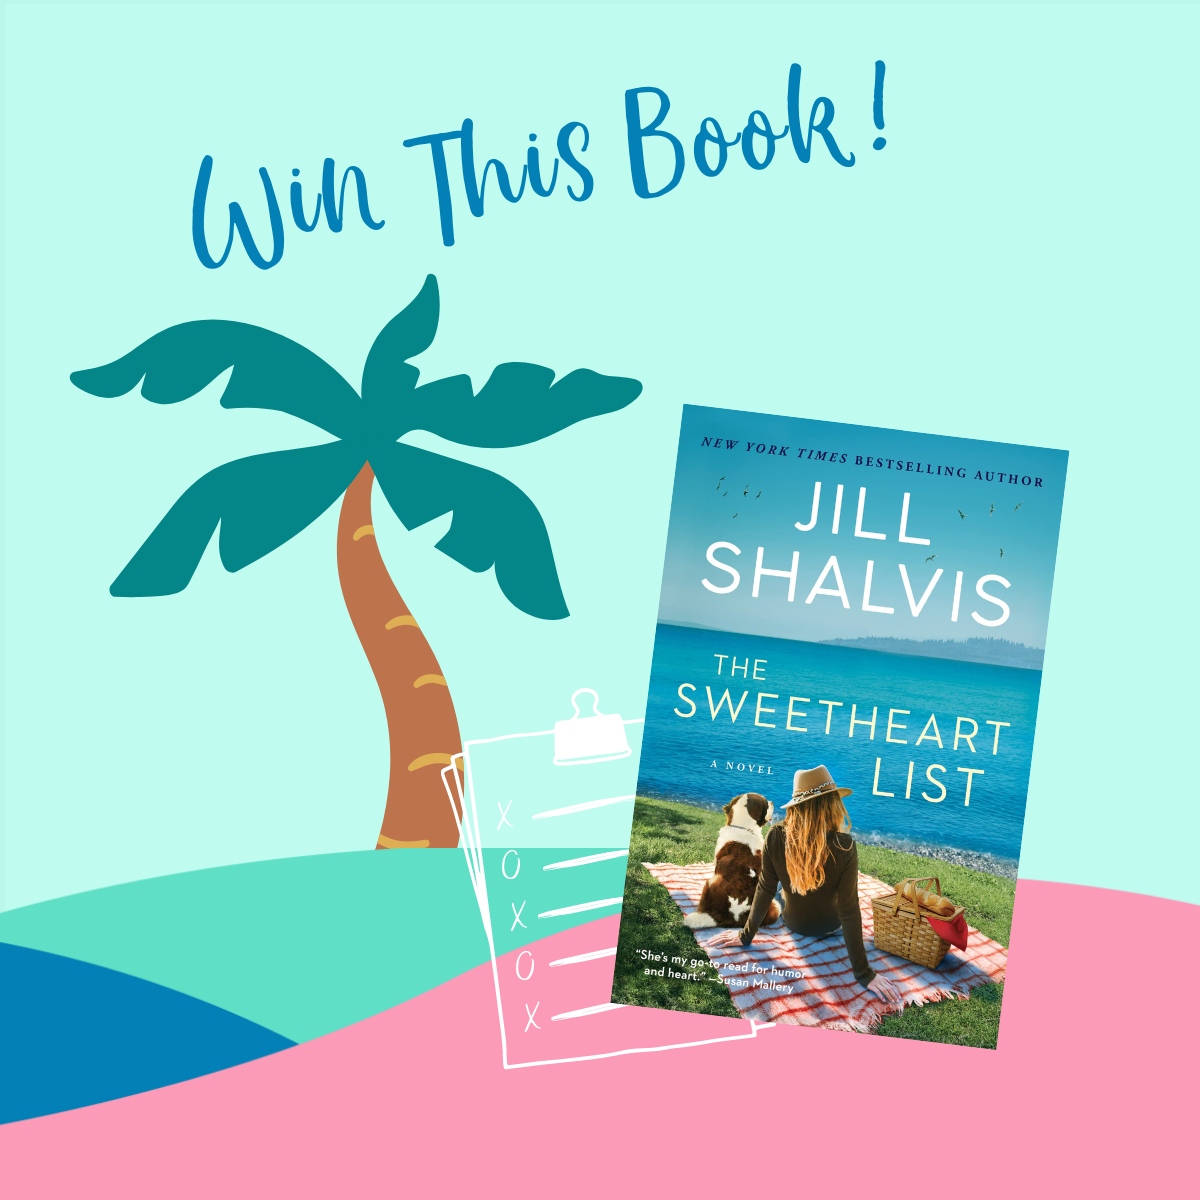 I'm giving away books all summer ~ Tell your friends!☀️

The While You Were Reading giveaway of the week is The Sweetheart List by @jillshalvis. 💙 Listen in and enter to win:

💙 whileyouwerereading.com 💙

#SummerGiveaways #BookGiveaway #Romance #FridayFreebie